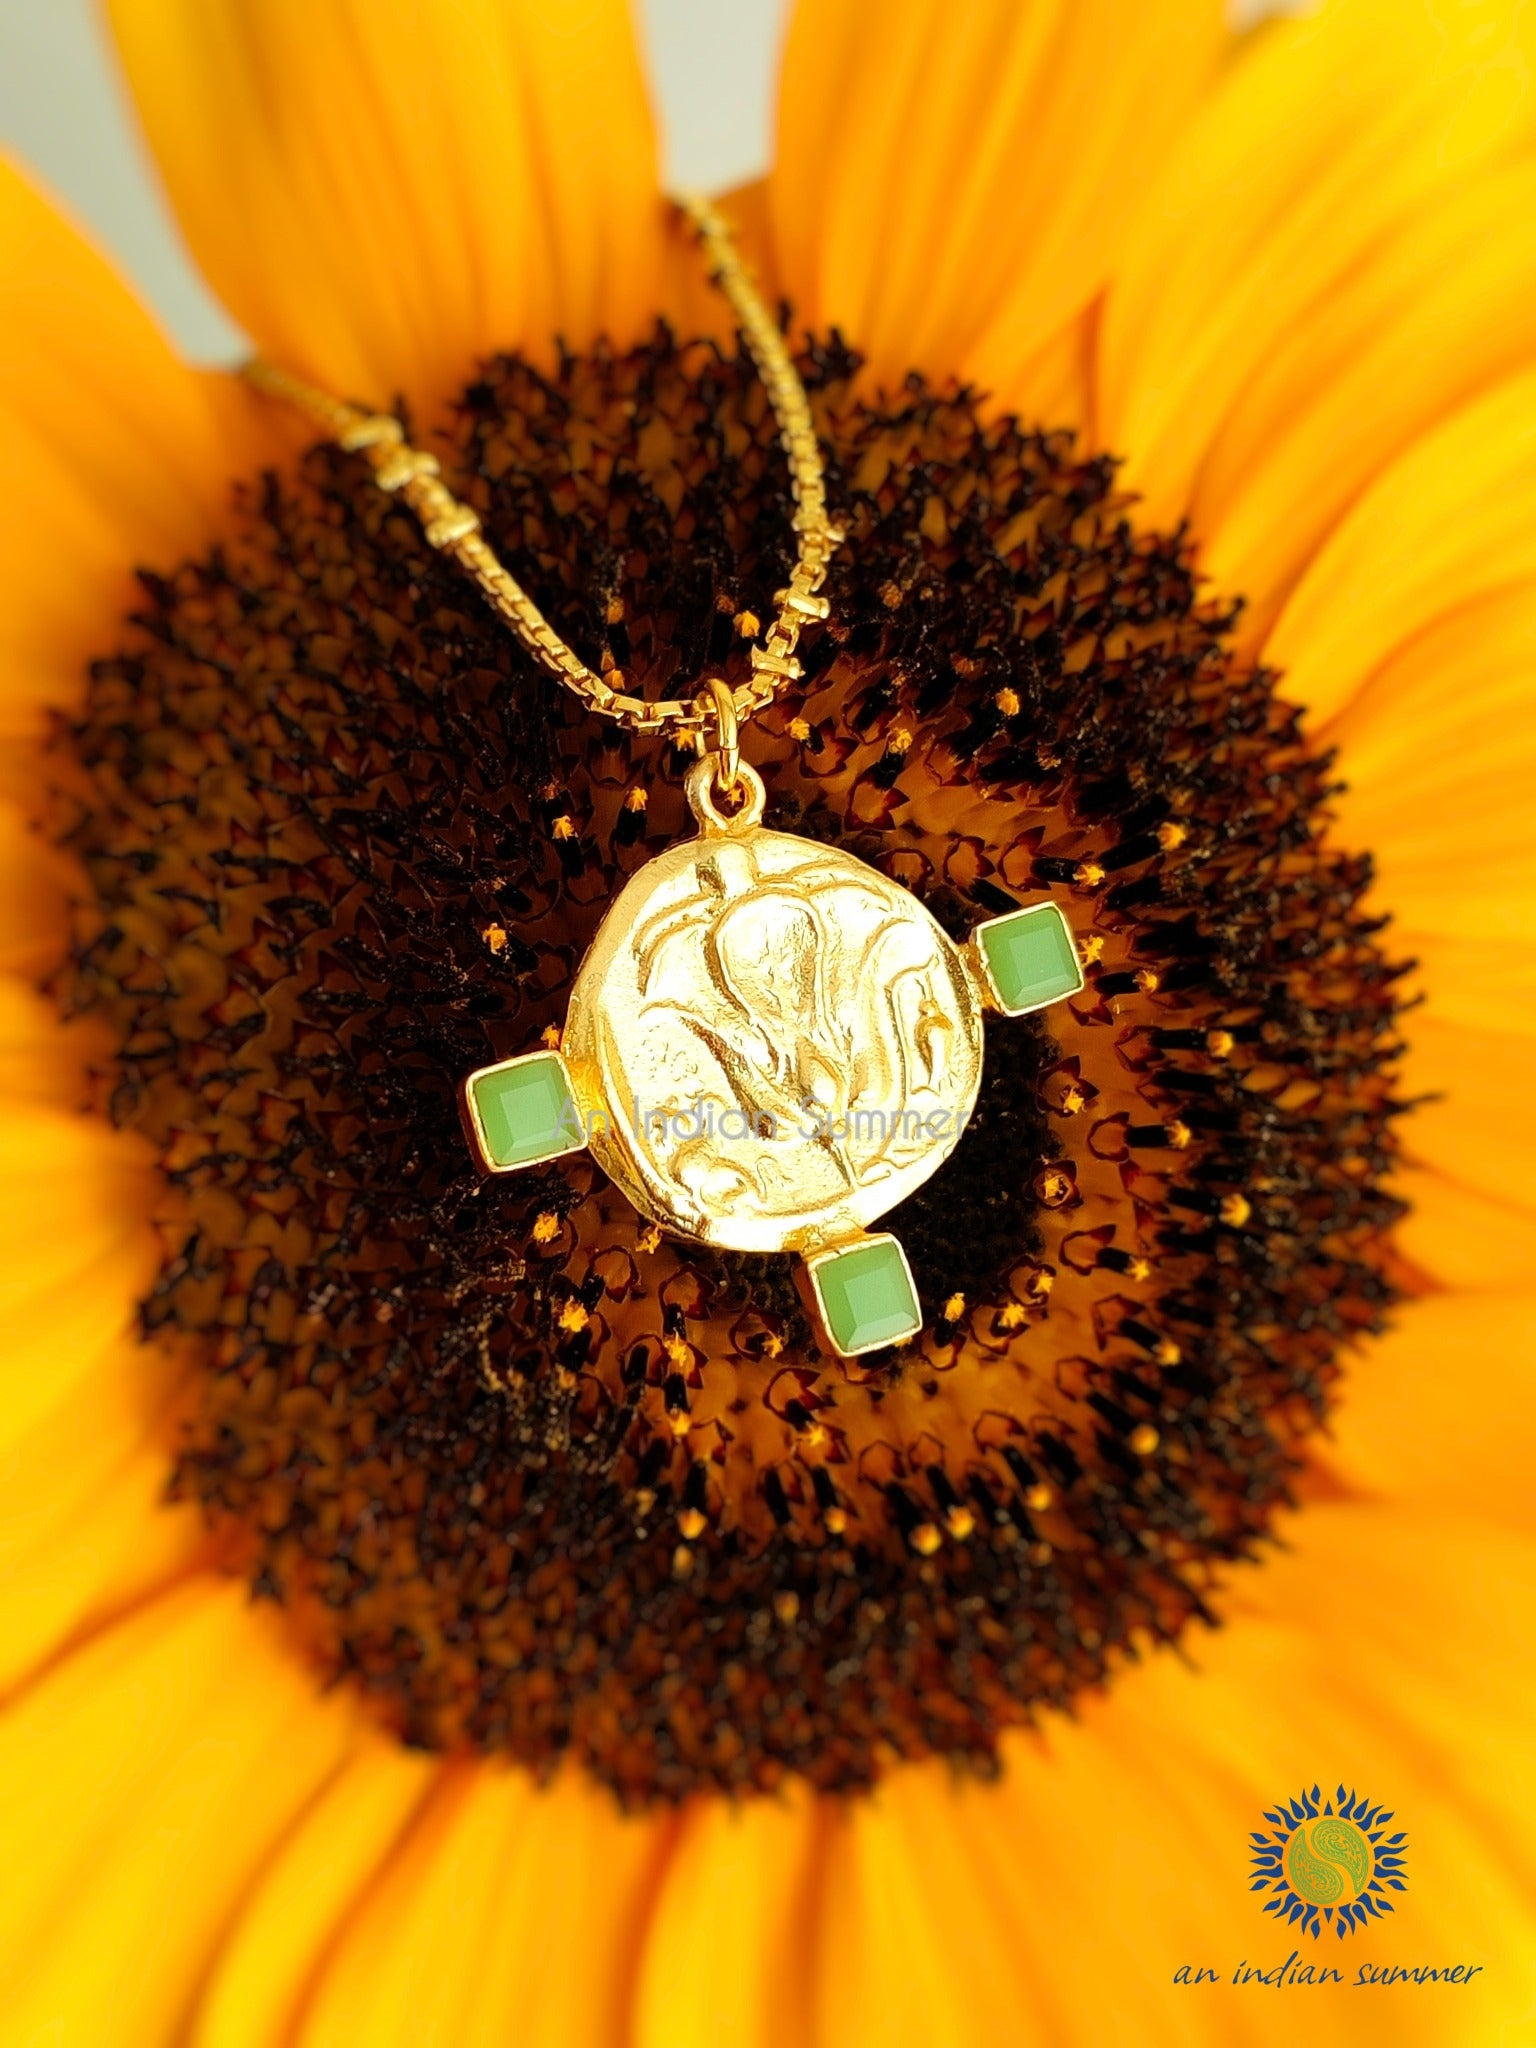 Talisman Medal Necklace - Lotus | Green Jade | 22 Carat Gold Plated Semi Precious Stones | An Indian Summer | Seasonless Timeless Sustainable Ethical Authentic Artisan Conscious Clothing Lifestyle Brand